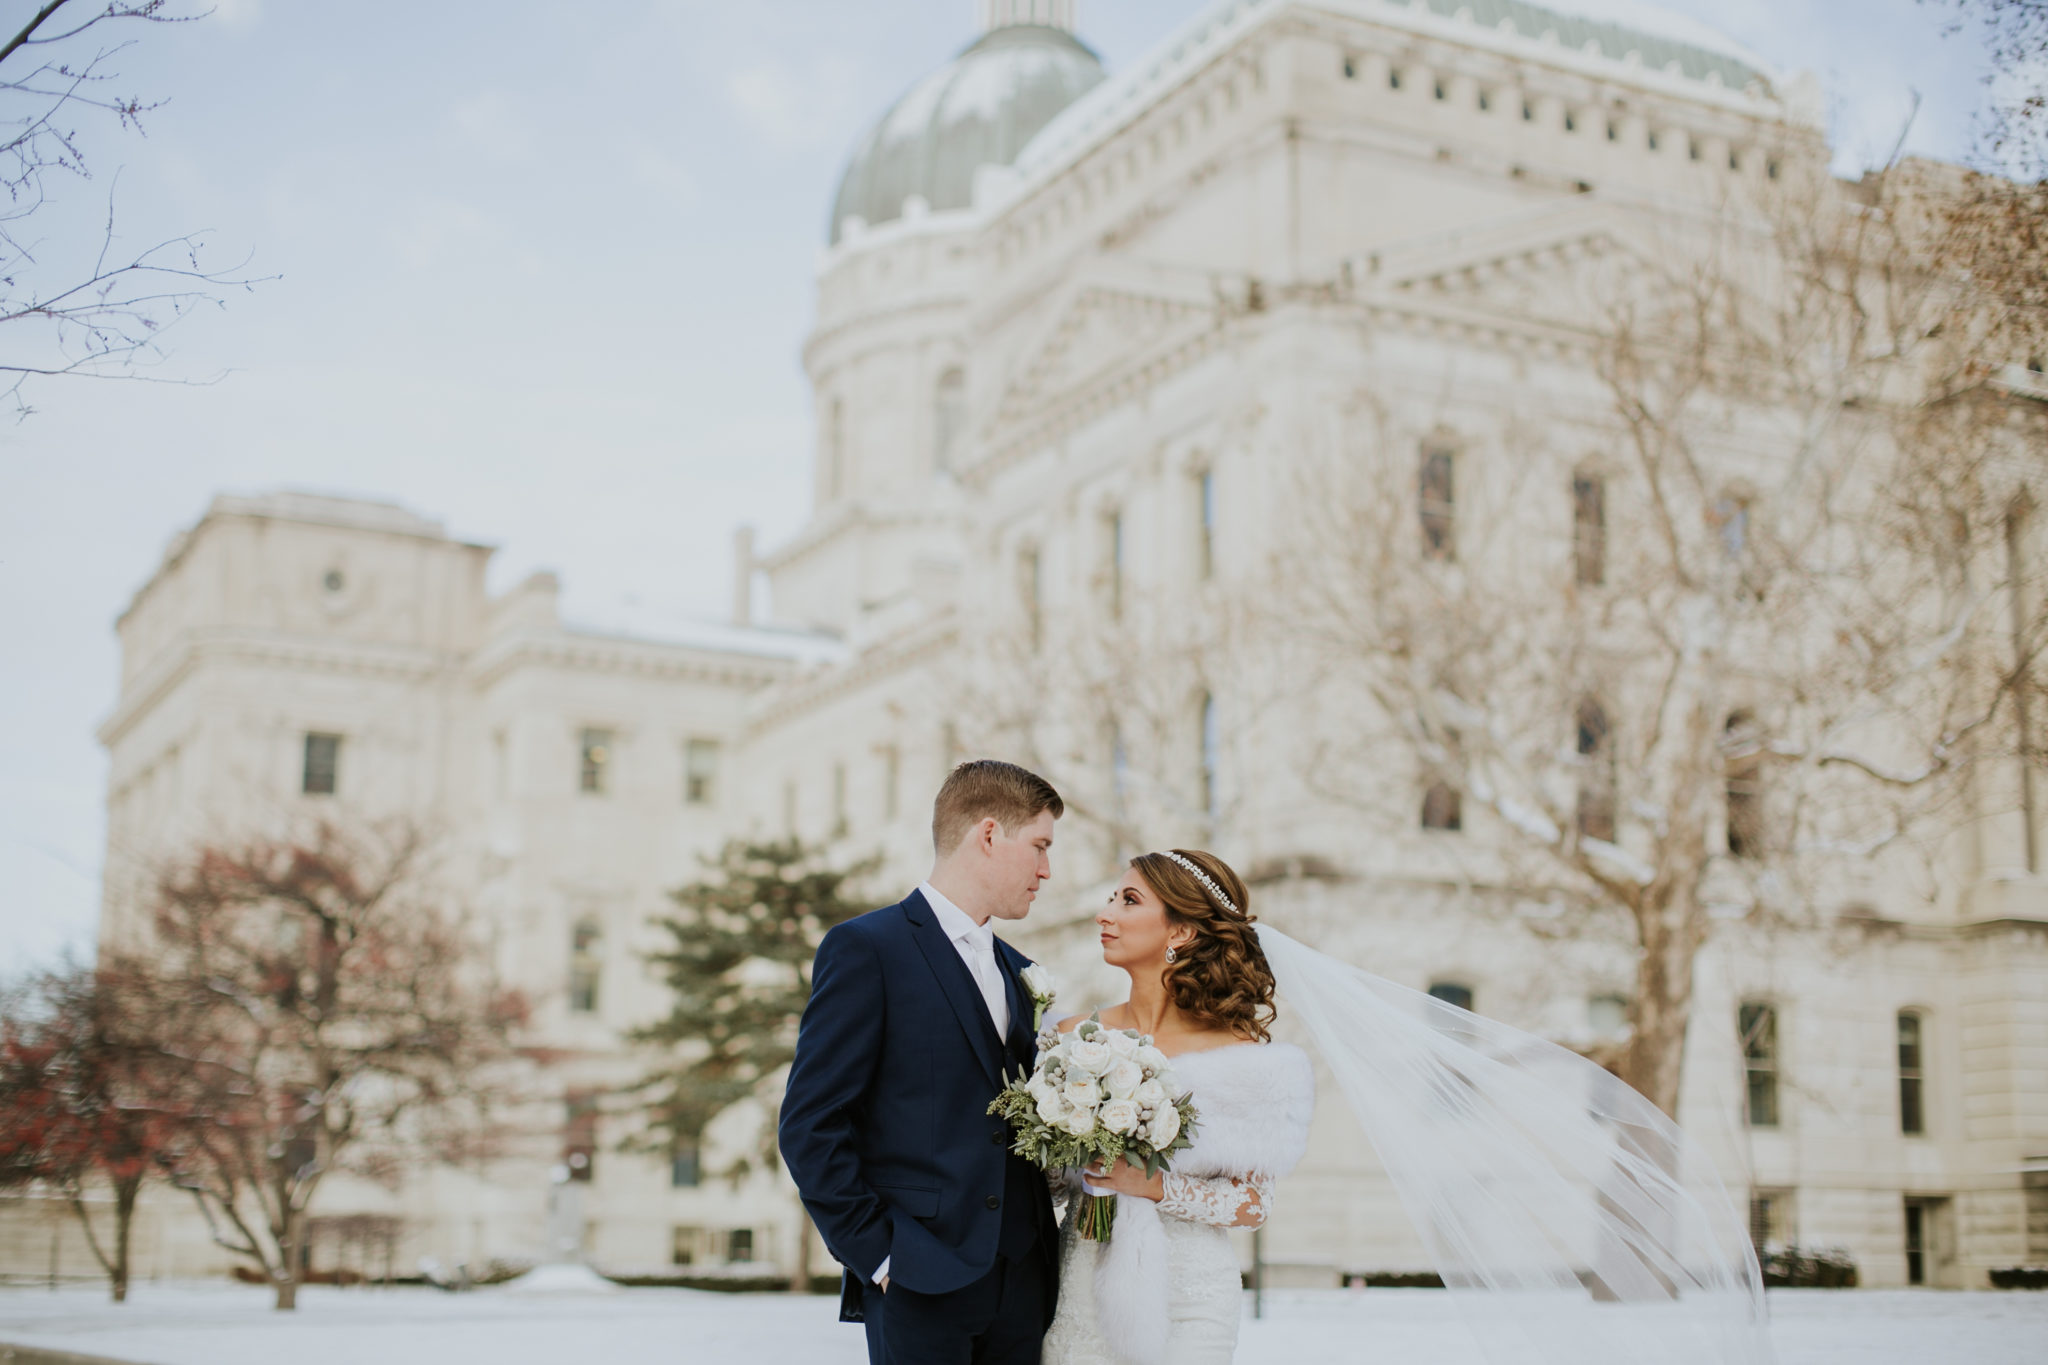 Wedding Photo of Groom and Bride in front of Indiana Statehouse in Winter with Snow on Ground